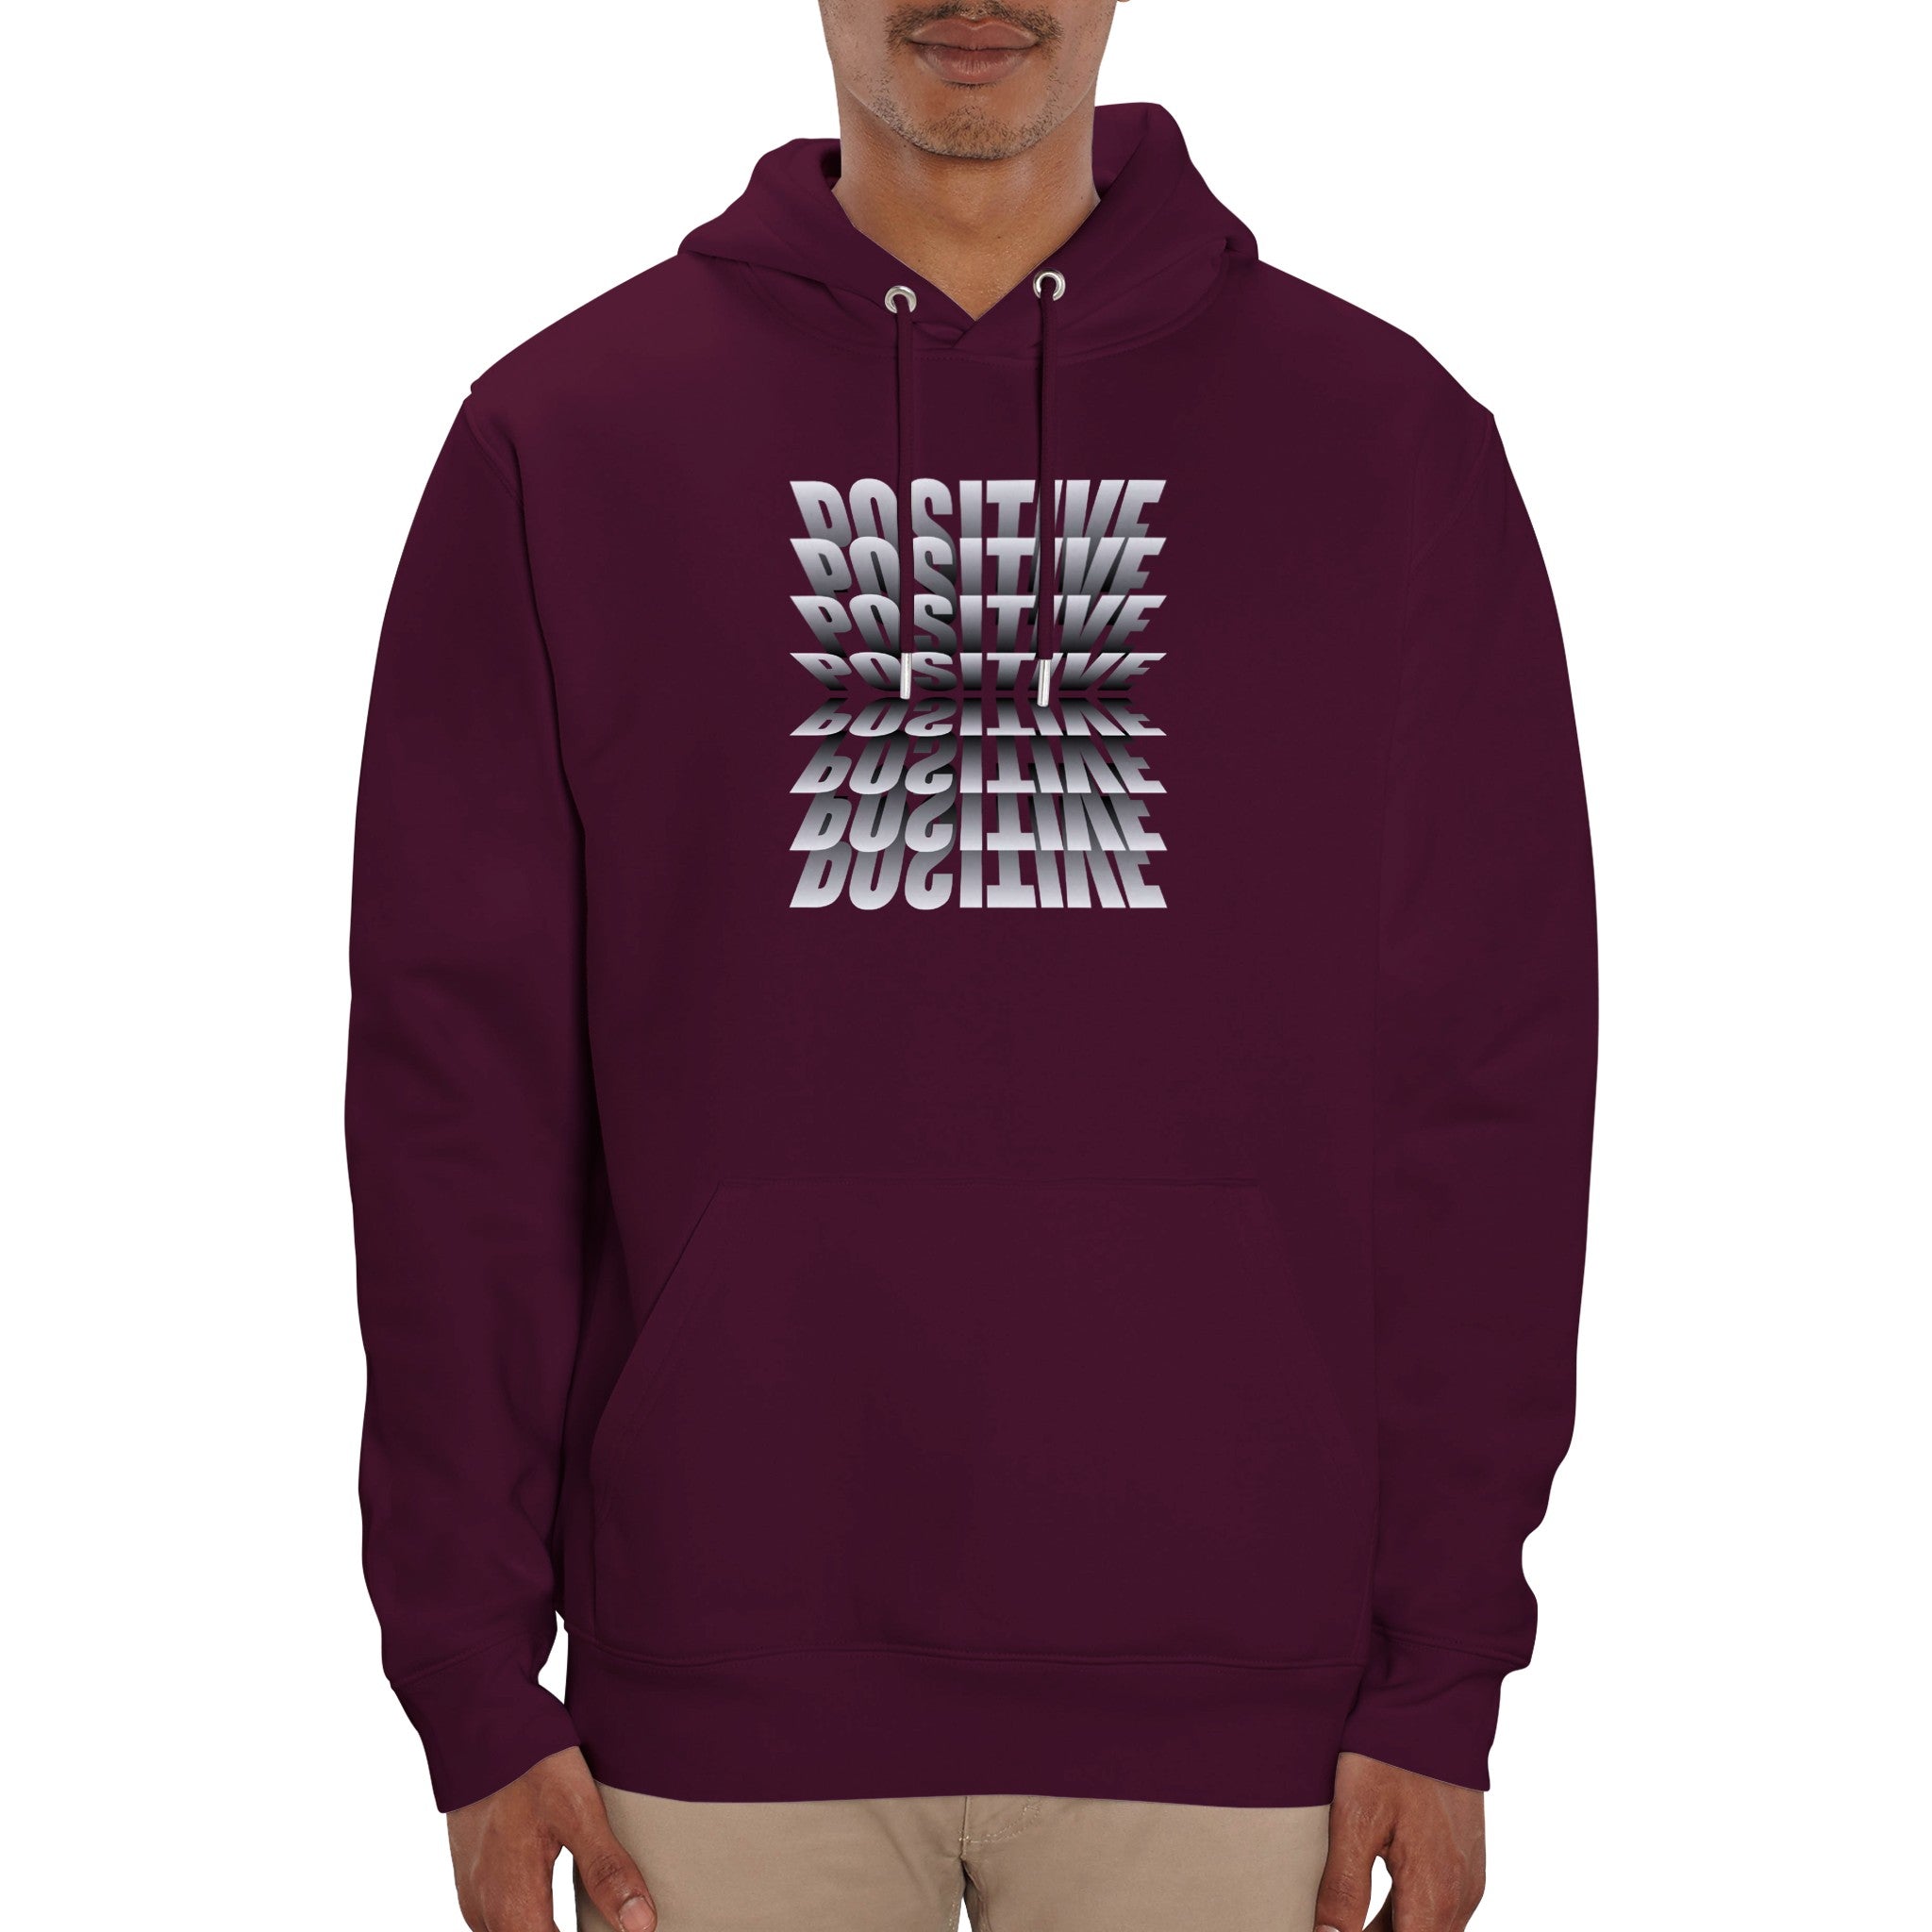 POSITIVE - Organic Unisex Pullover Hoodie by Pink Clouds